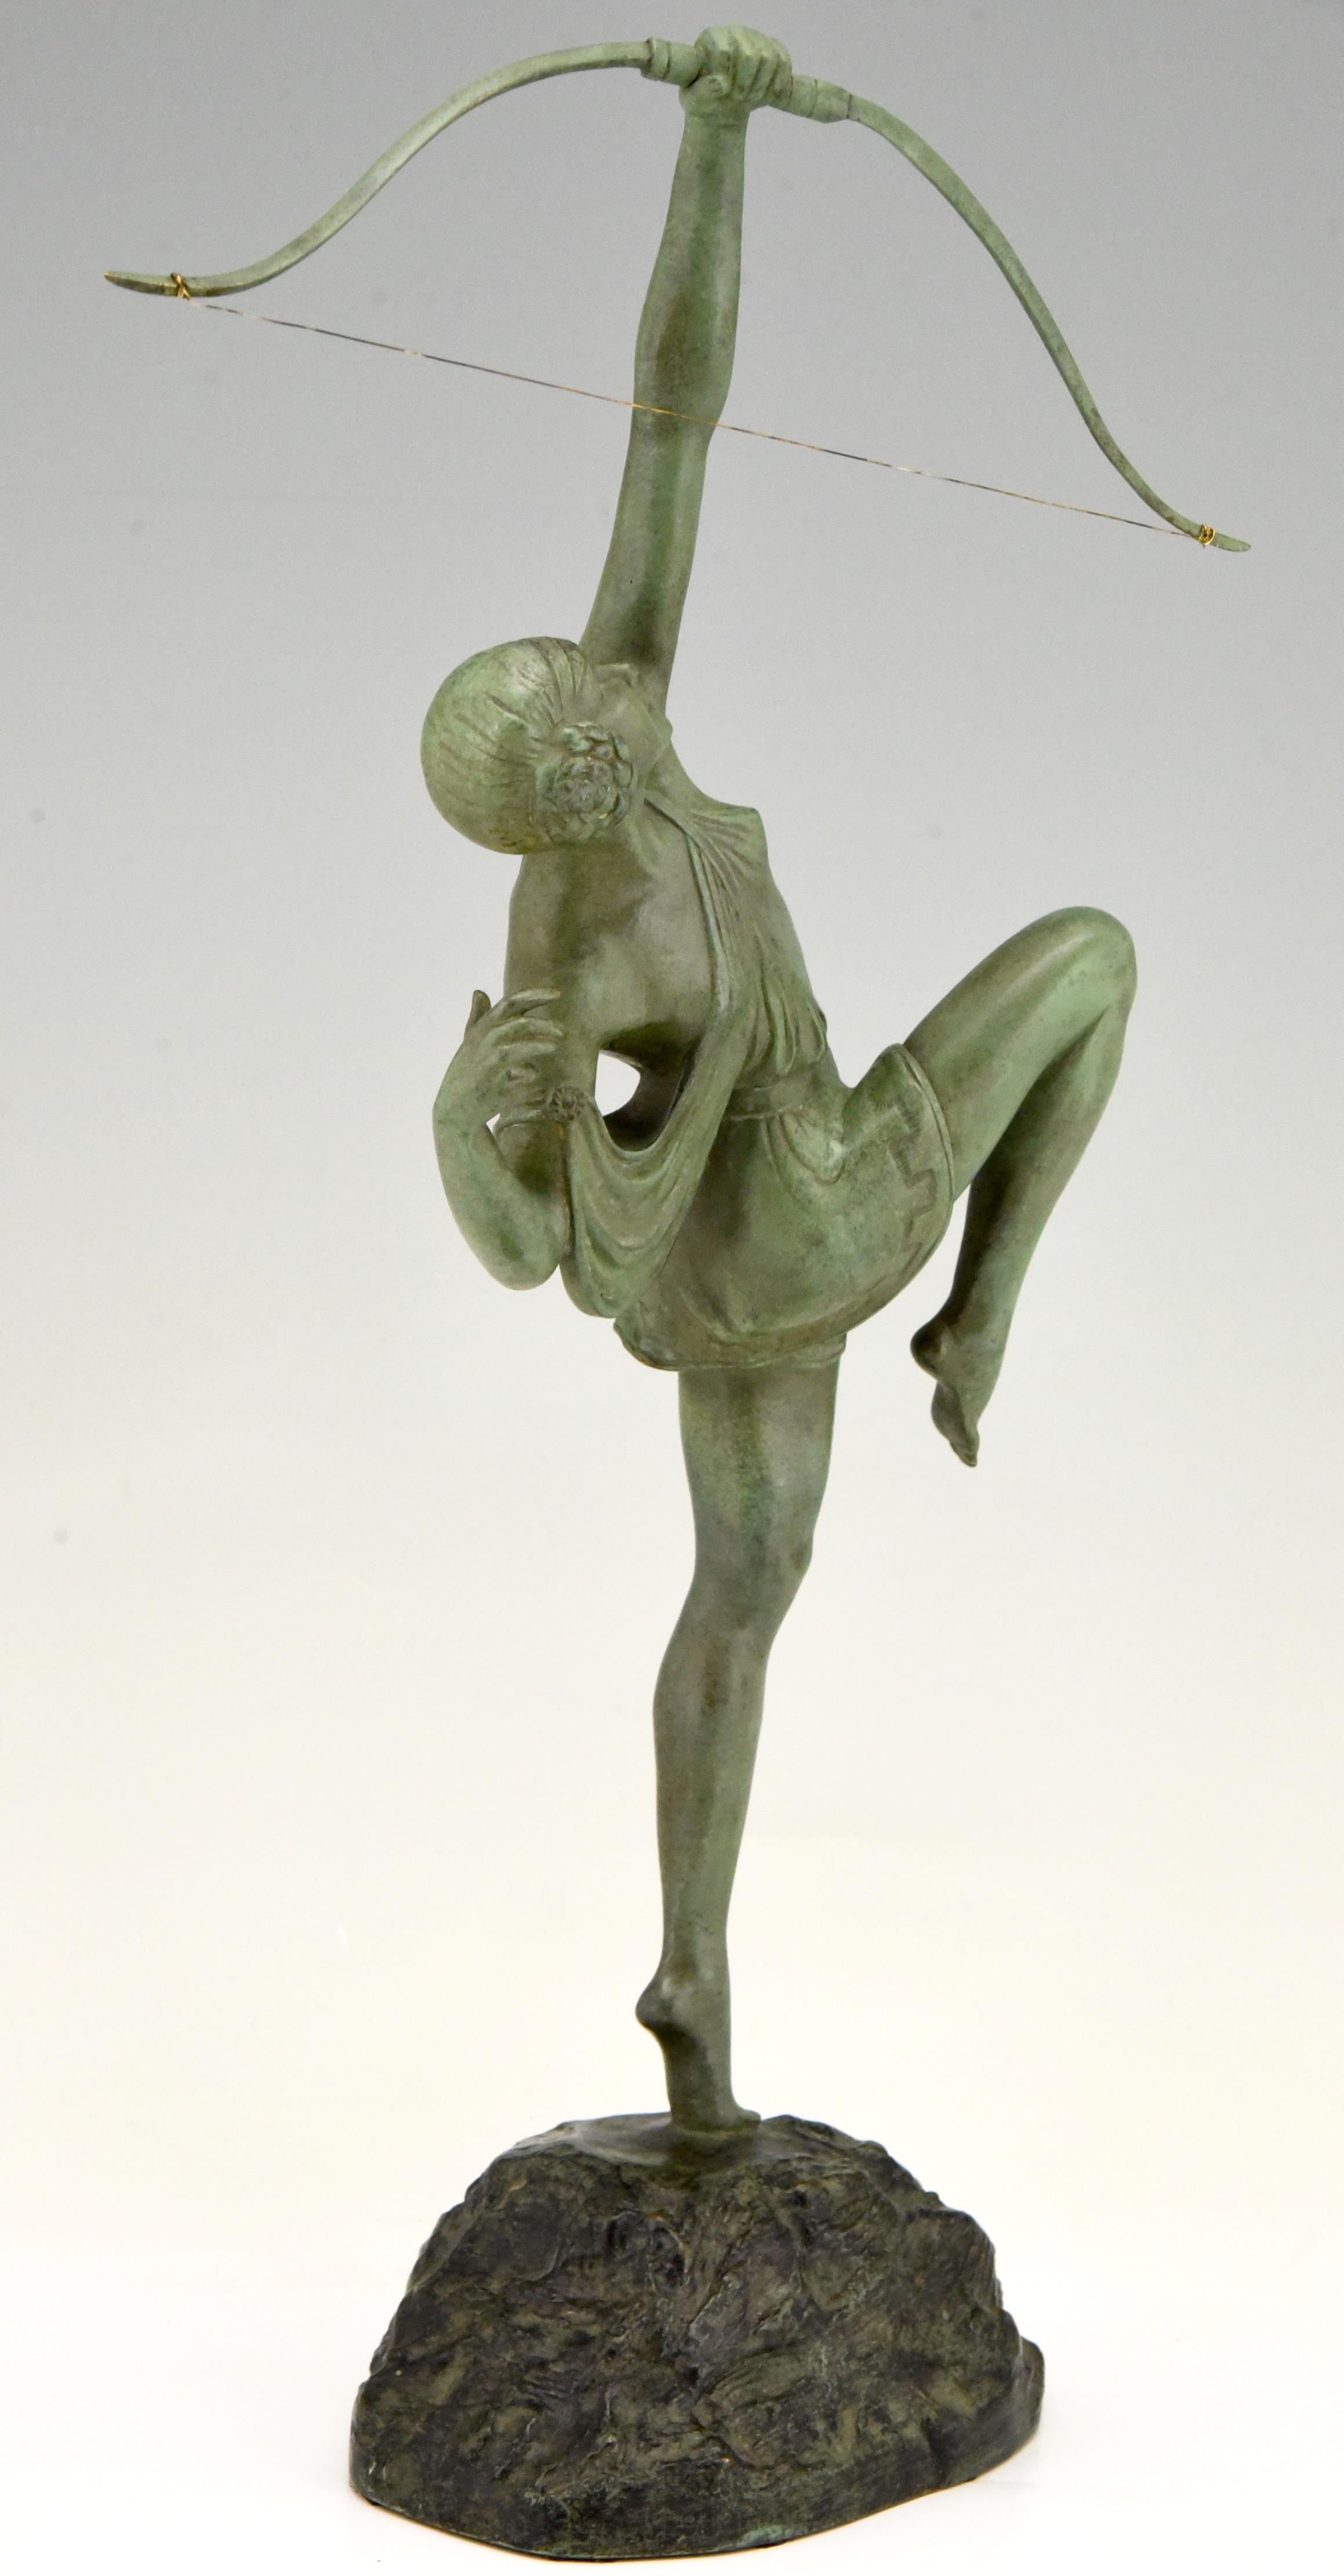 Patinated Art Deco Bronze Sculpture Woman with Bow Diana Pierre Le Faguays, 1925